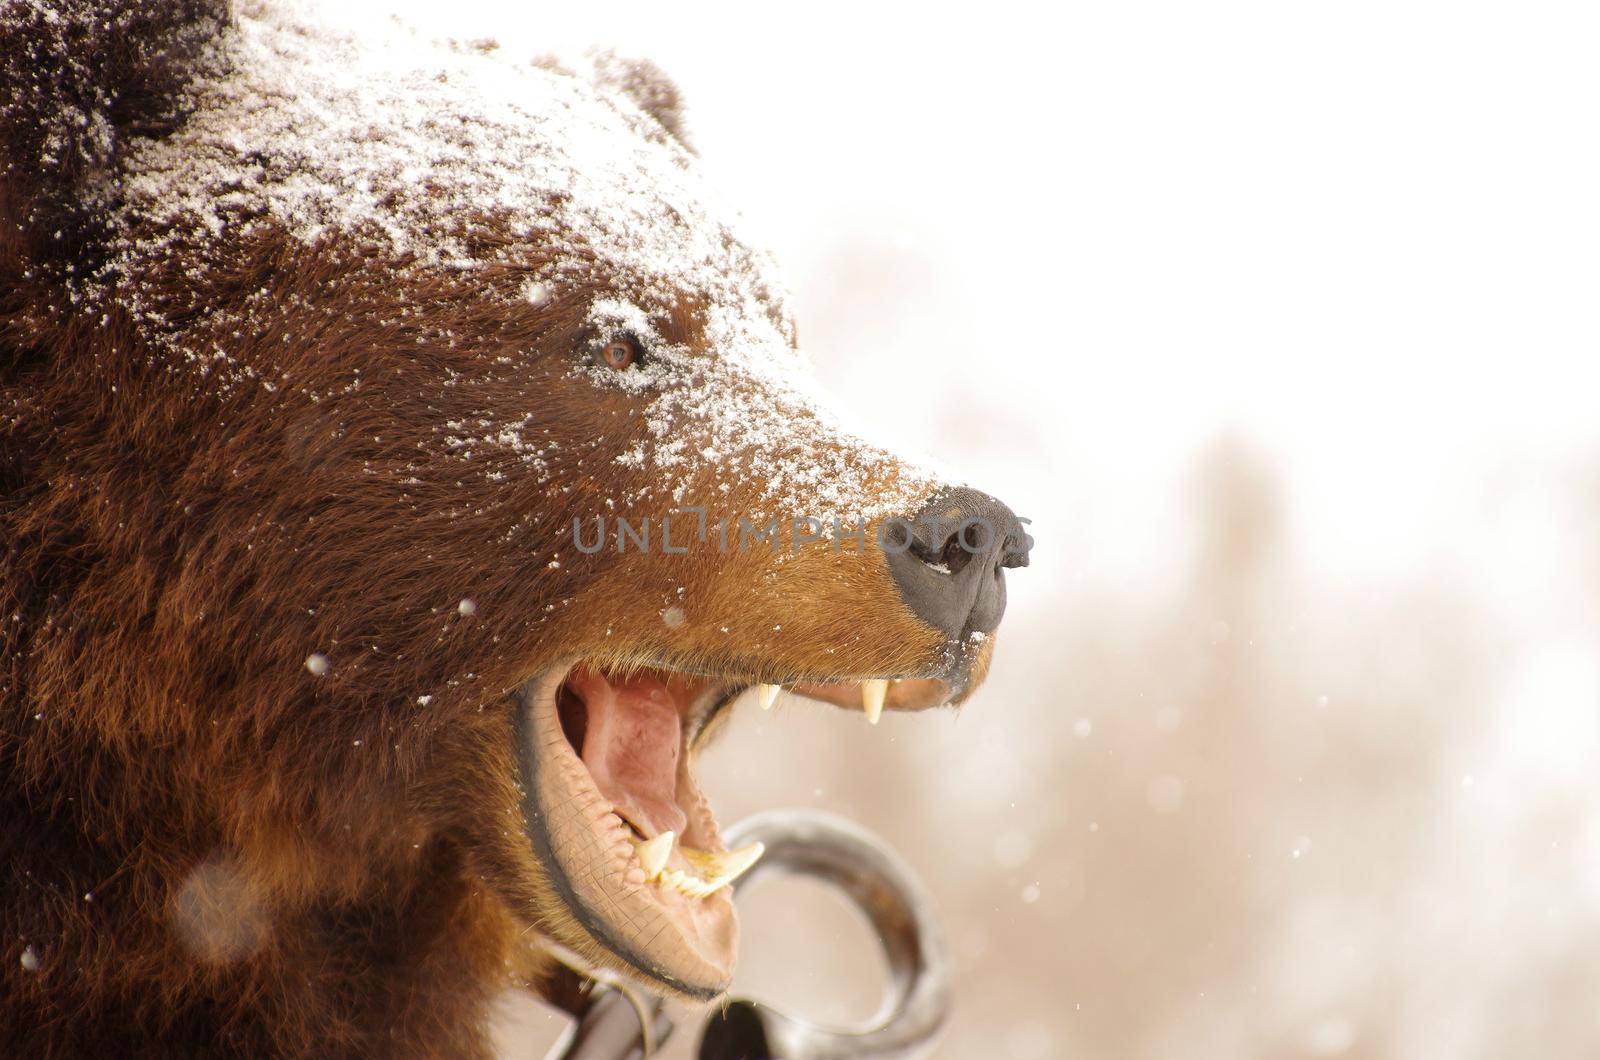 A stuffed brown bear with an open mouth on a city street during a snowfall by fifg